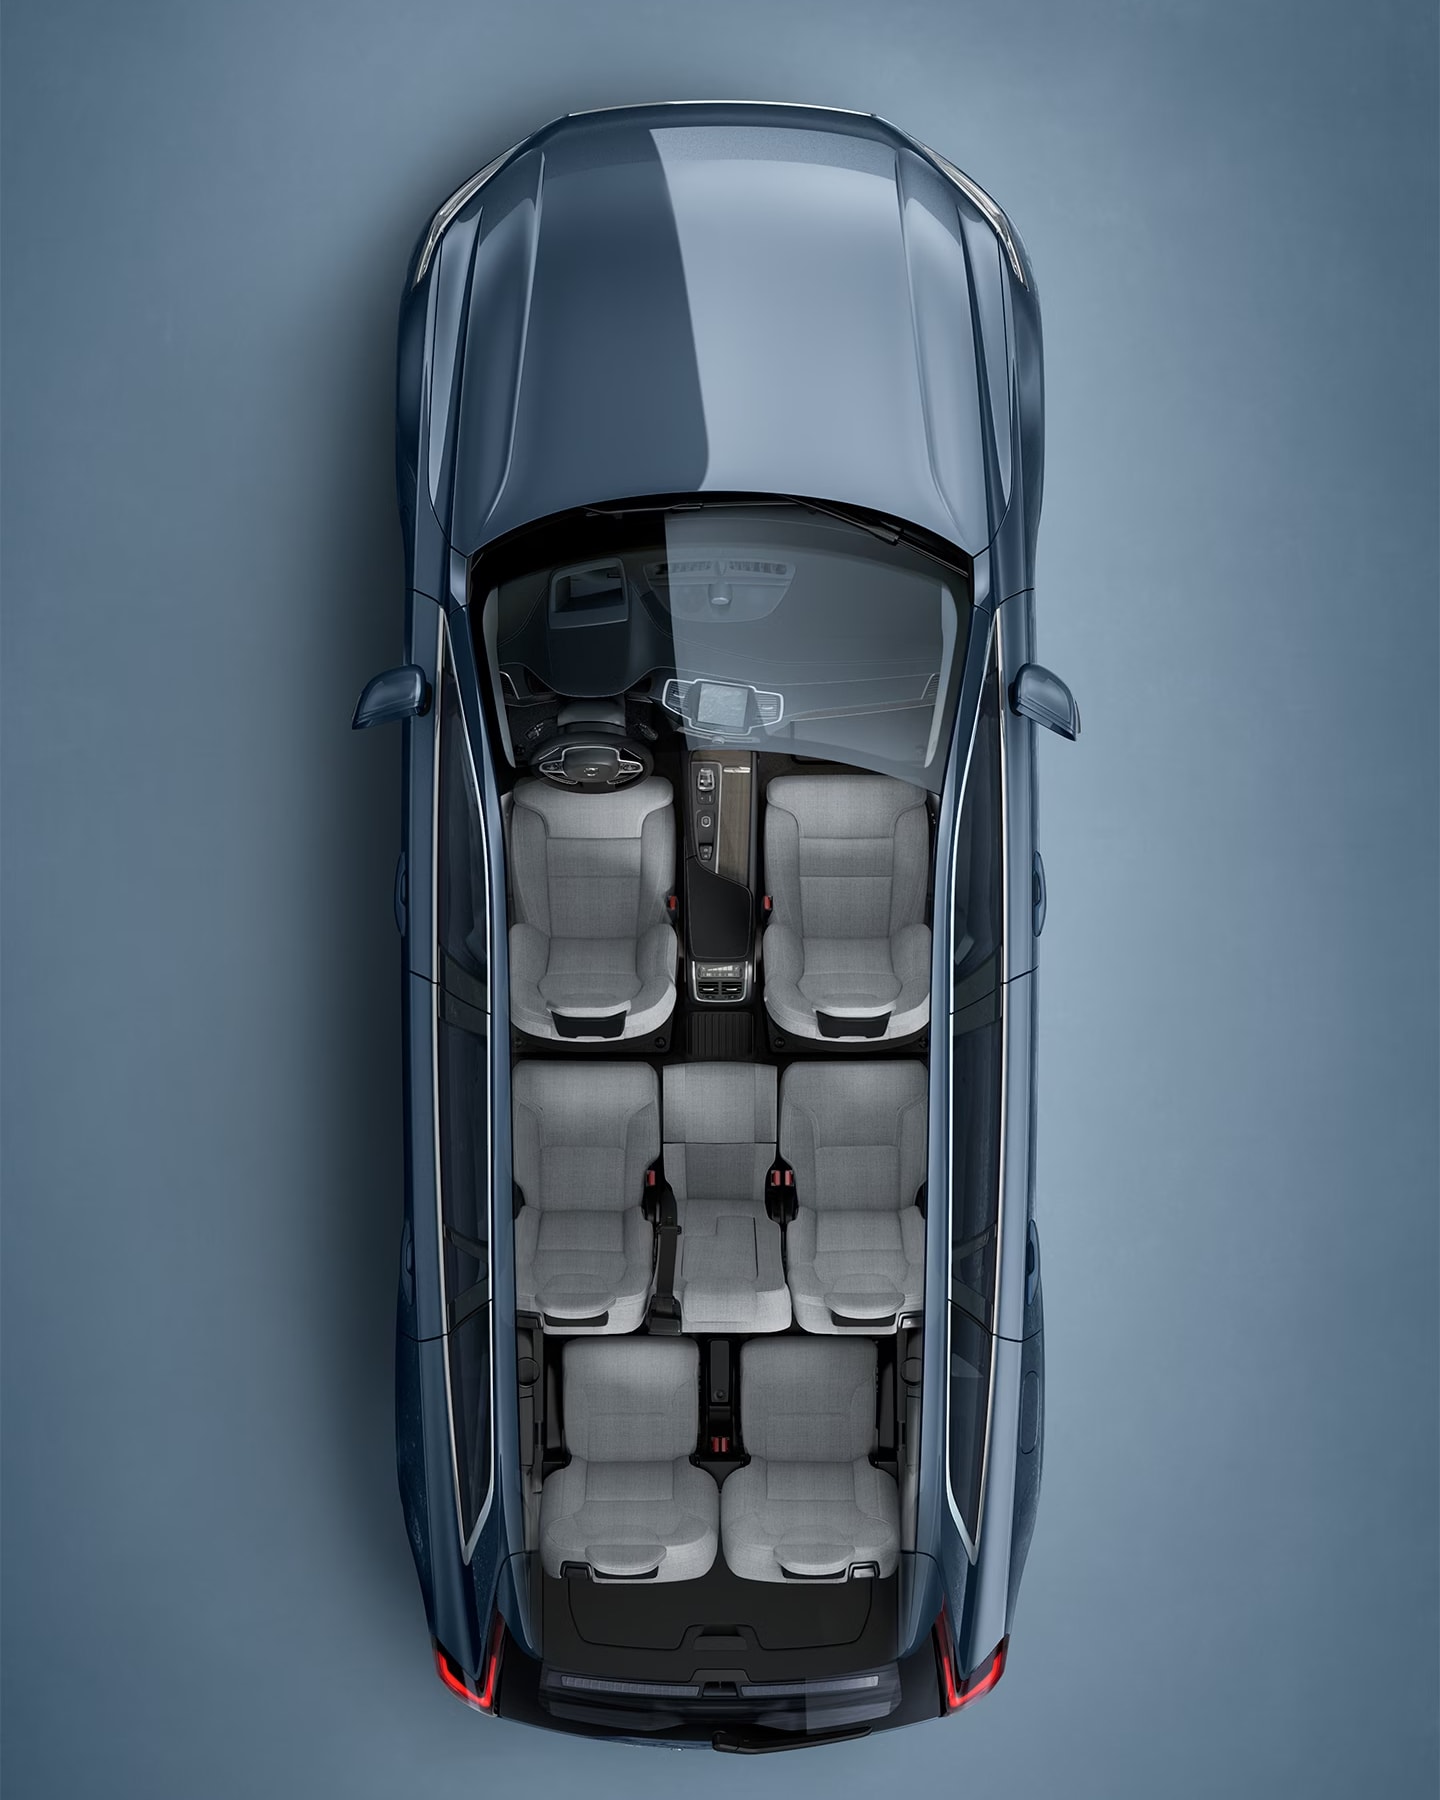 A blue Volvo XC90 SUV seen from directly above with interior visible.